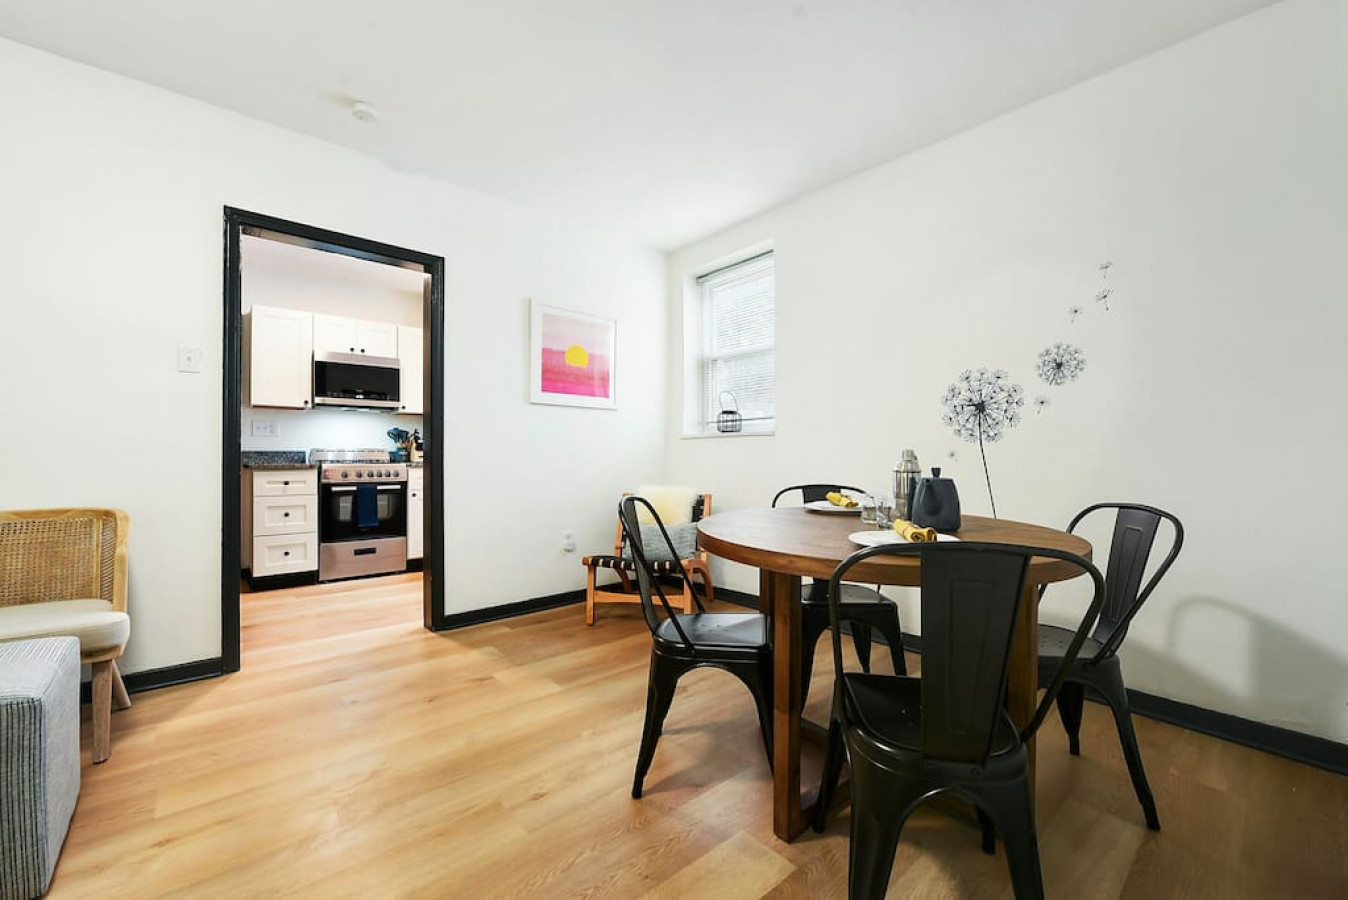 Prime Butler St Location
★Lower Lawrenceville ★ Brand new ★ First Floor ★ Private Entrance